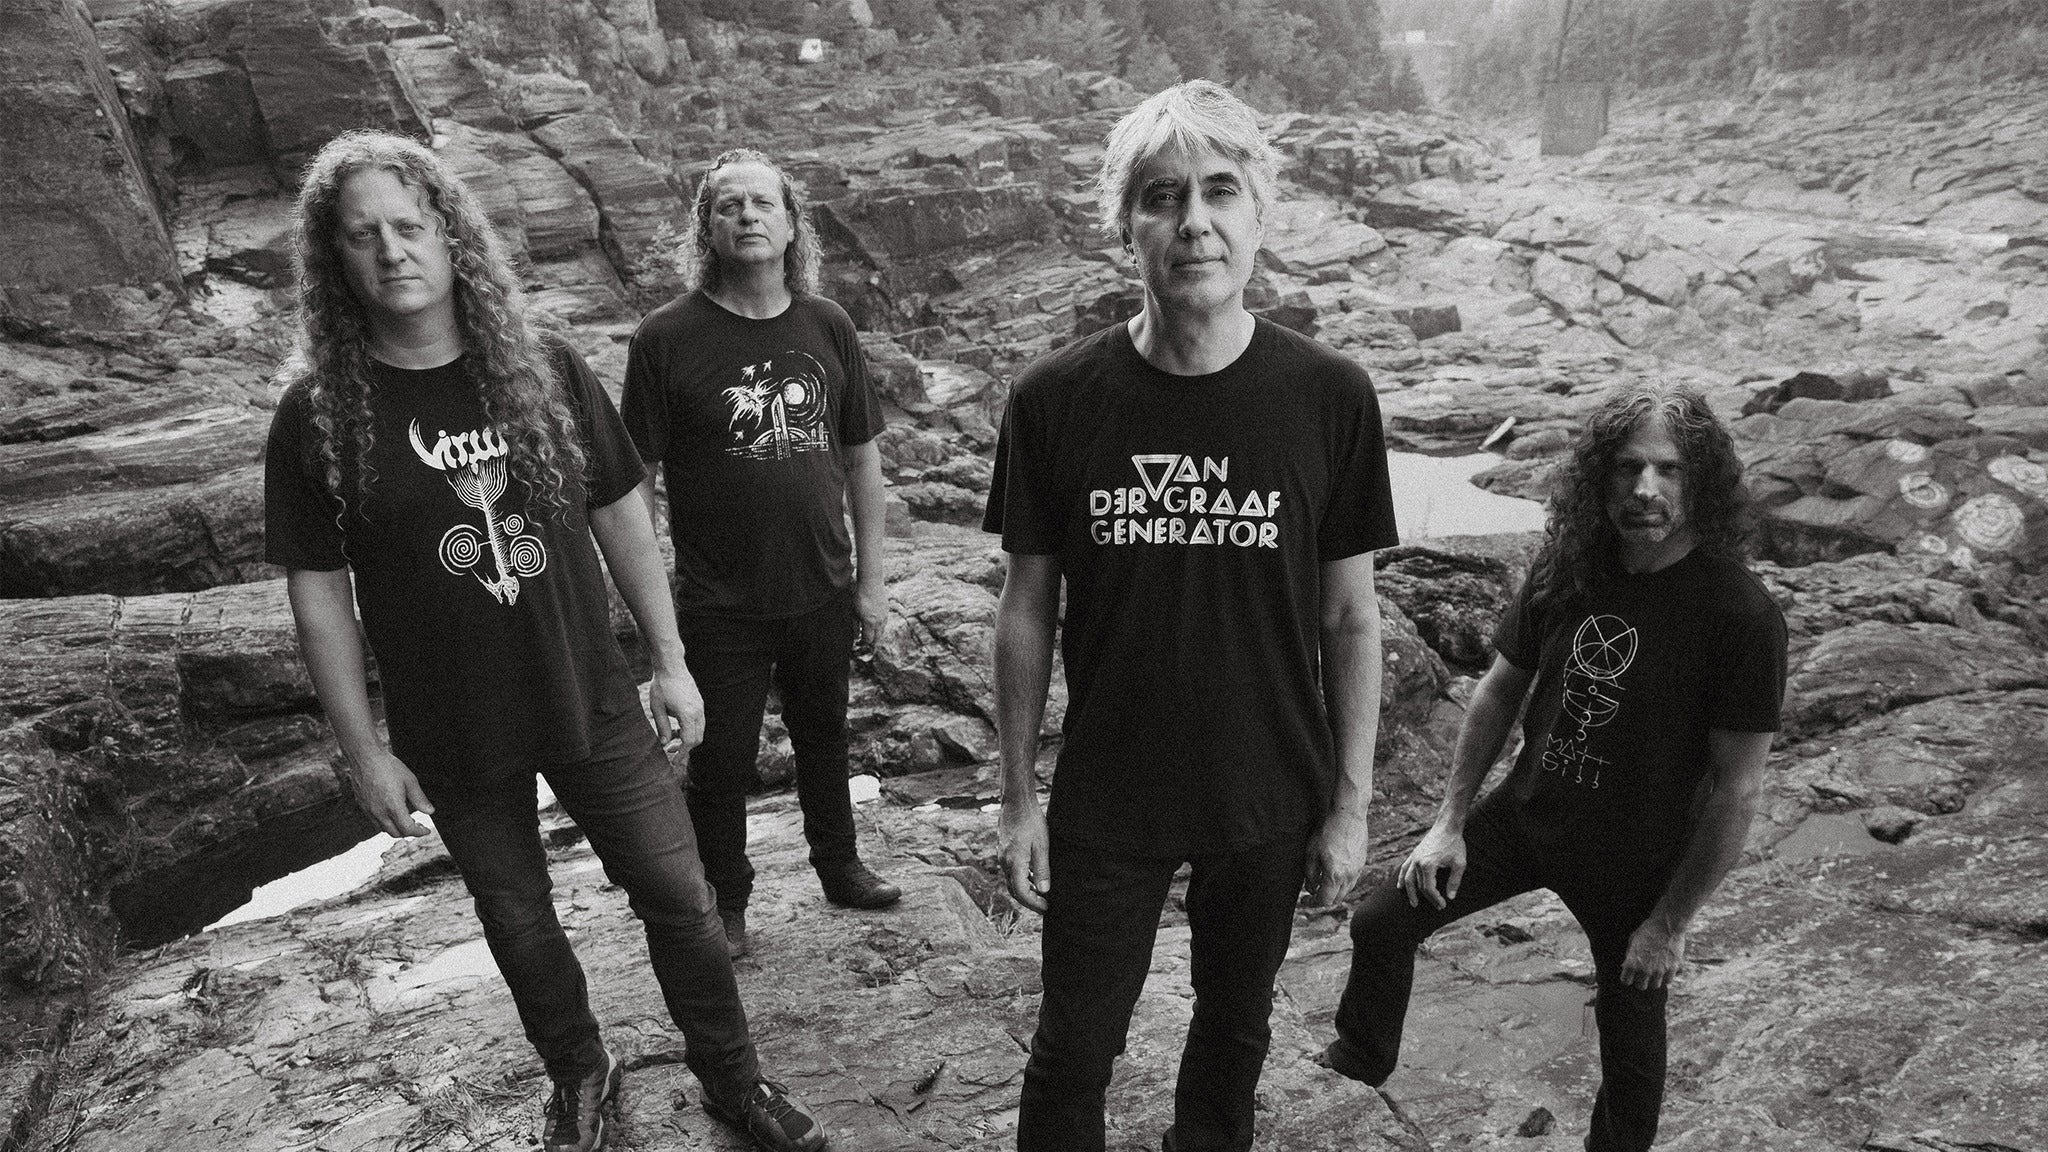 Voivod in Québec promo photo for Achat 3 personnes presale offer code